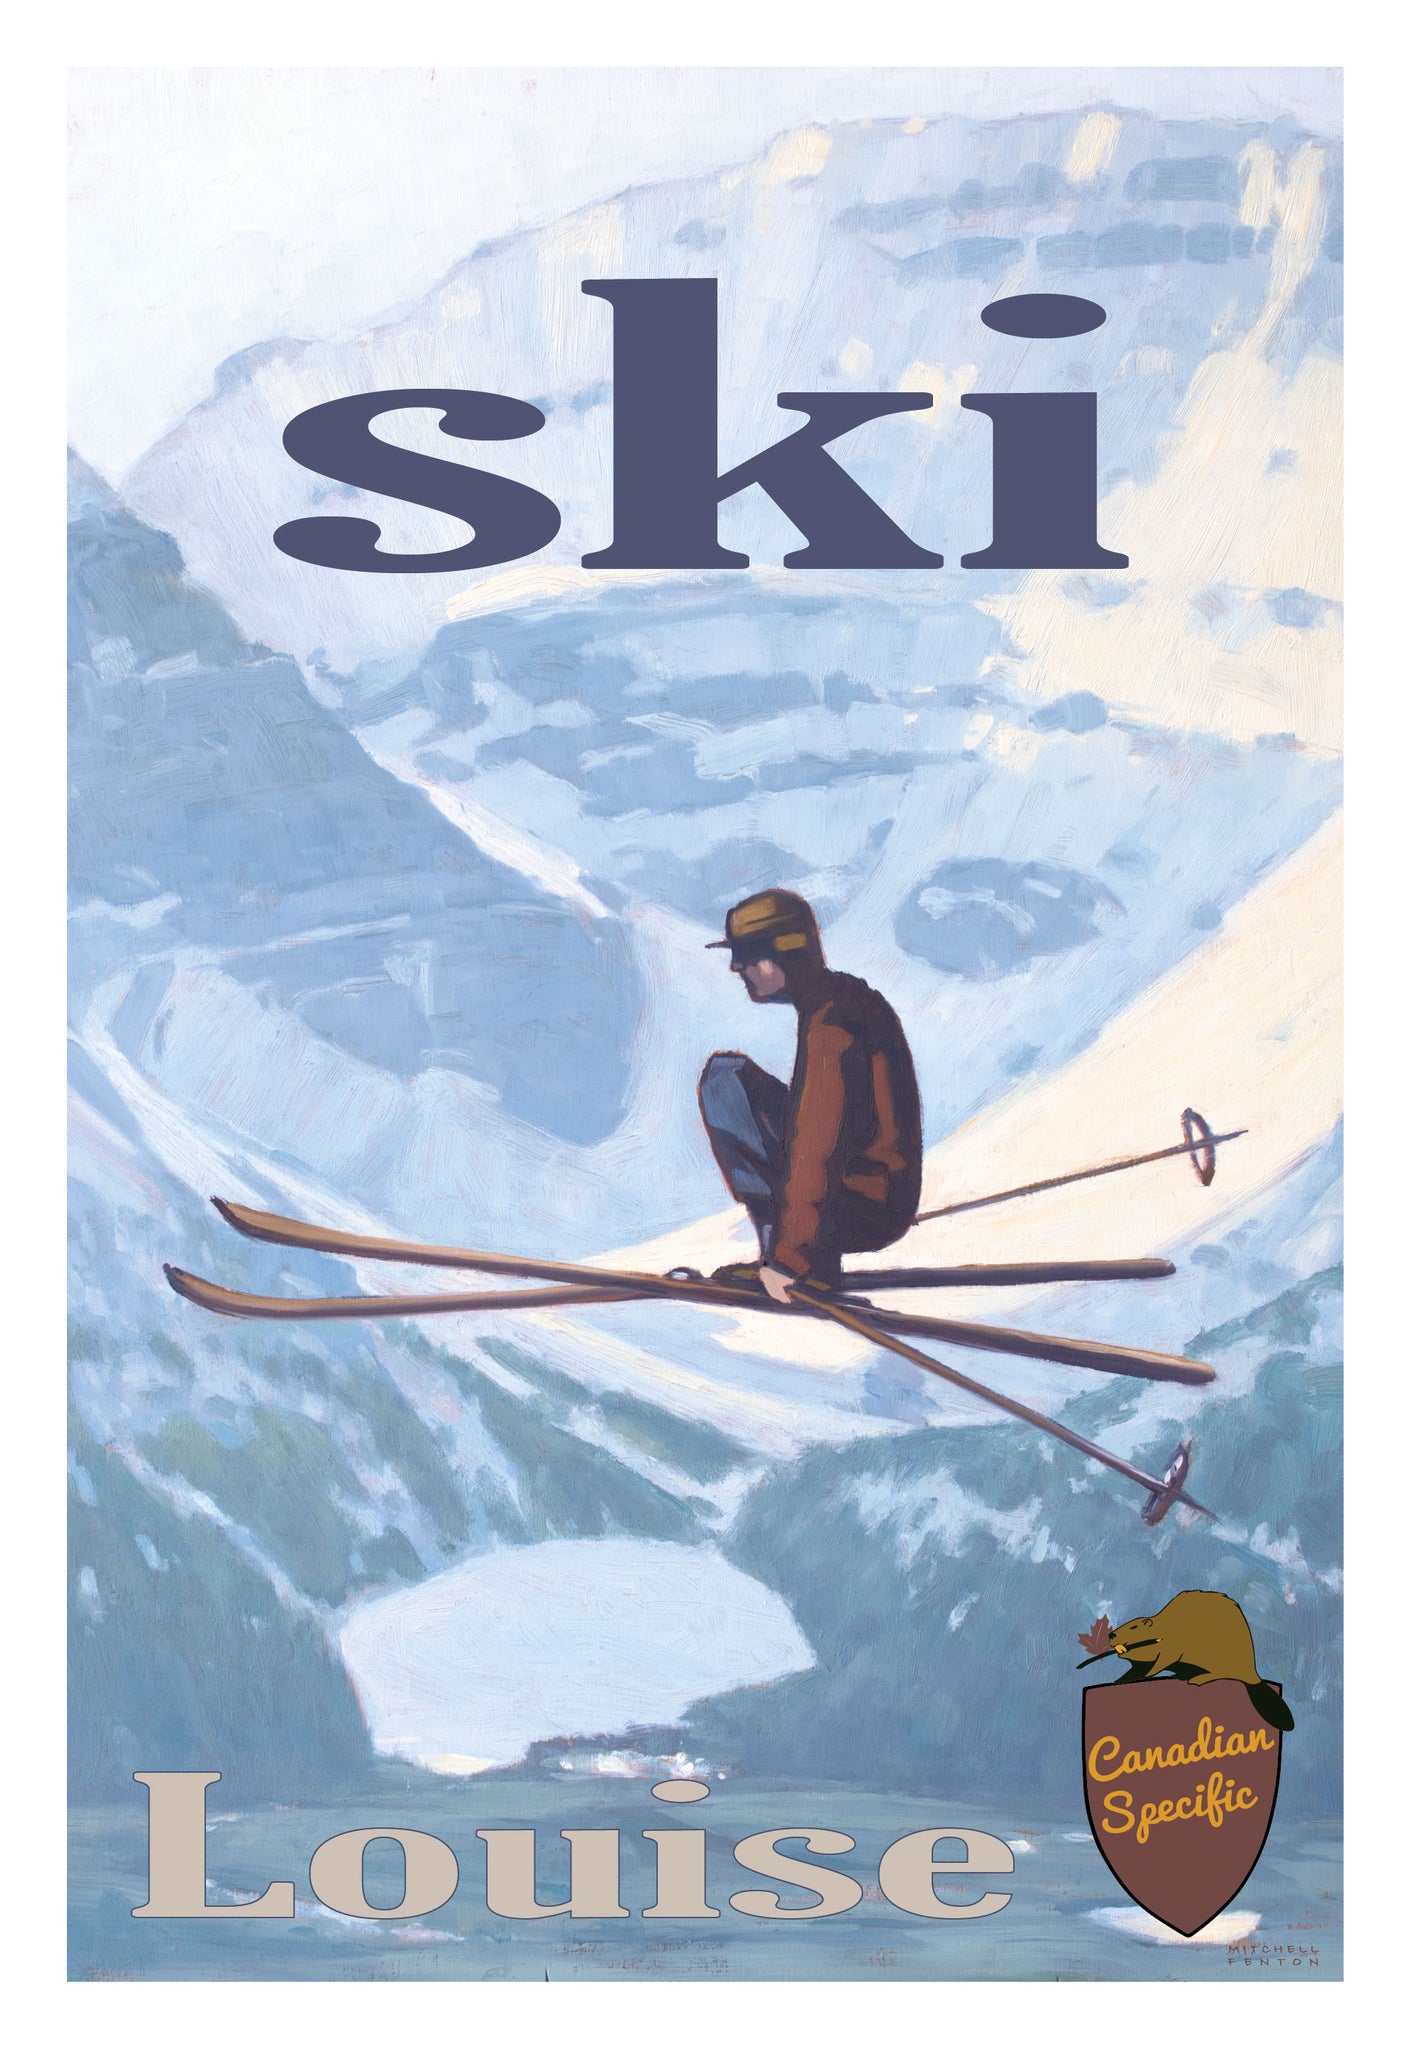 Ski Lake Louise vintage style poster with freestyle skier in wooden skis and Lake Louise visible behind